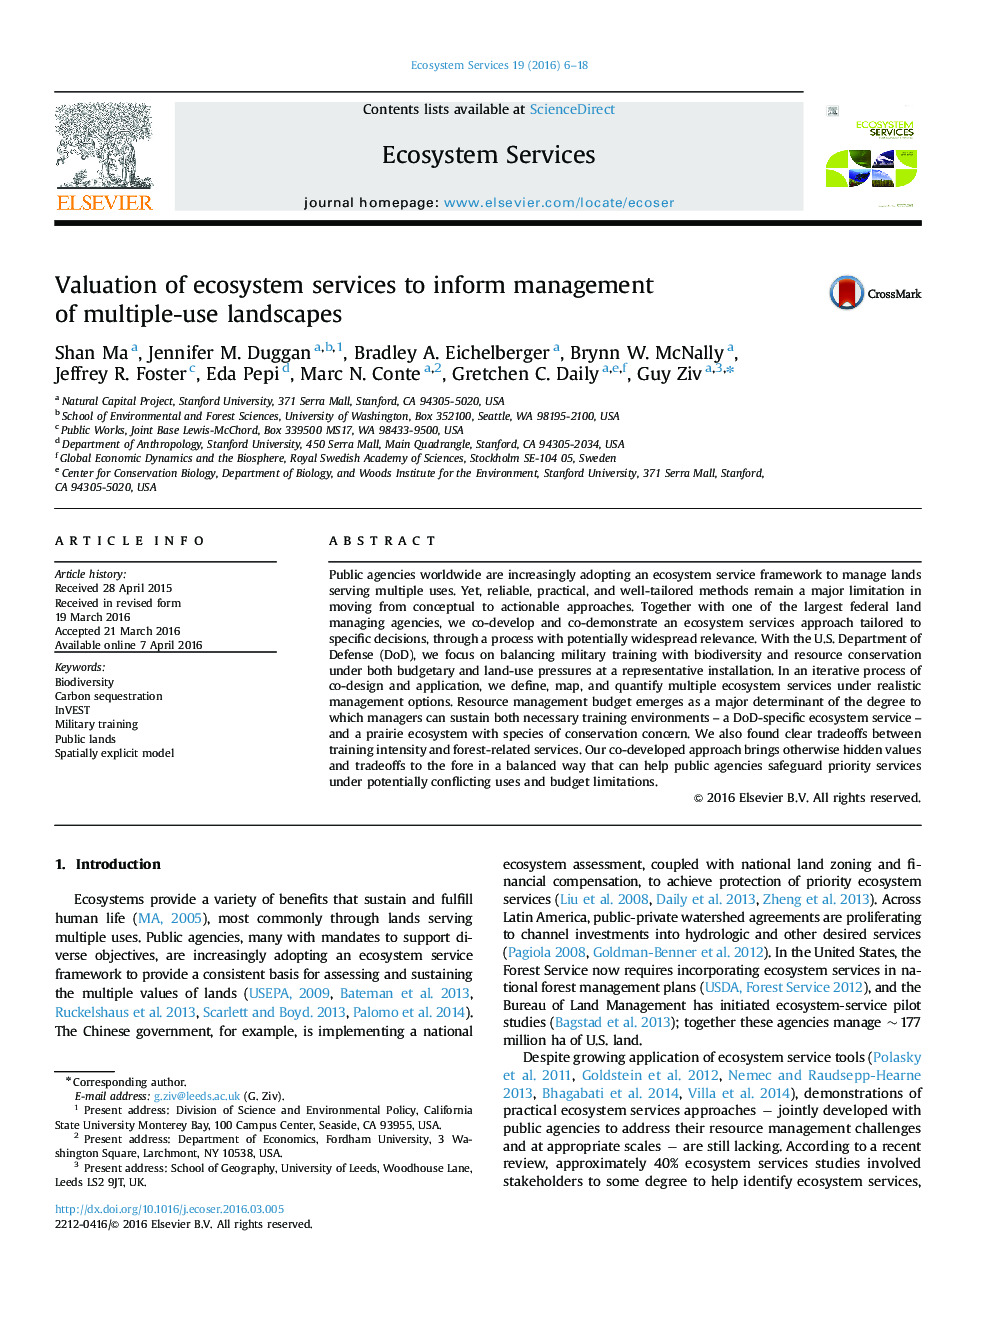 Valuation of ecosystem services to inform management of multiple-use landscapes